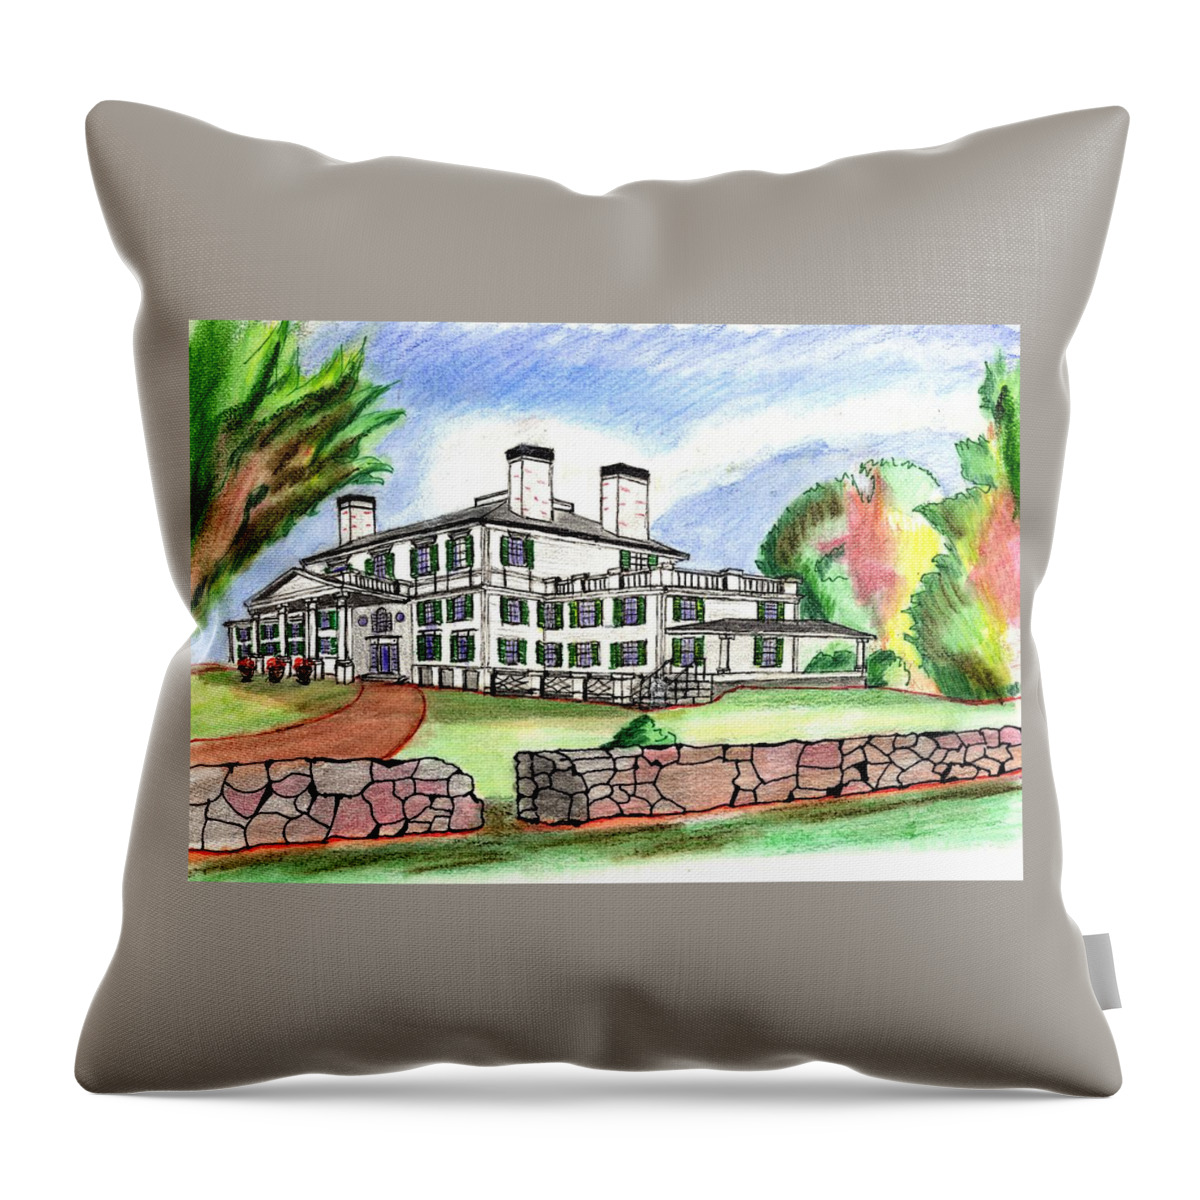 Paul Meinerth Artist Throw Pillow featuring the drawing Glen Magna Farms Danvers by Paul Meinerth